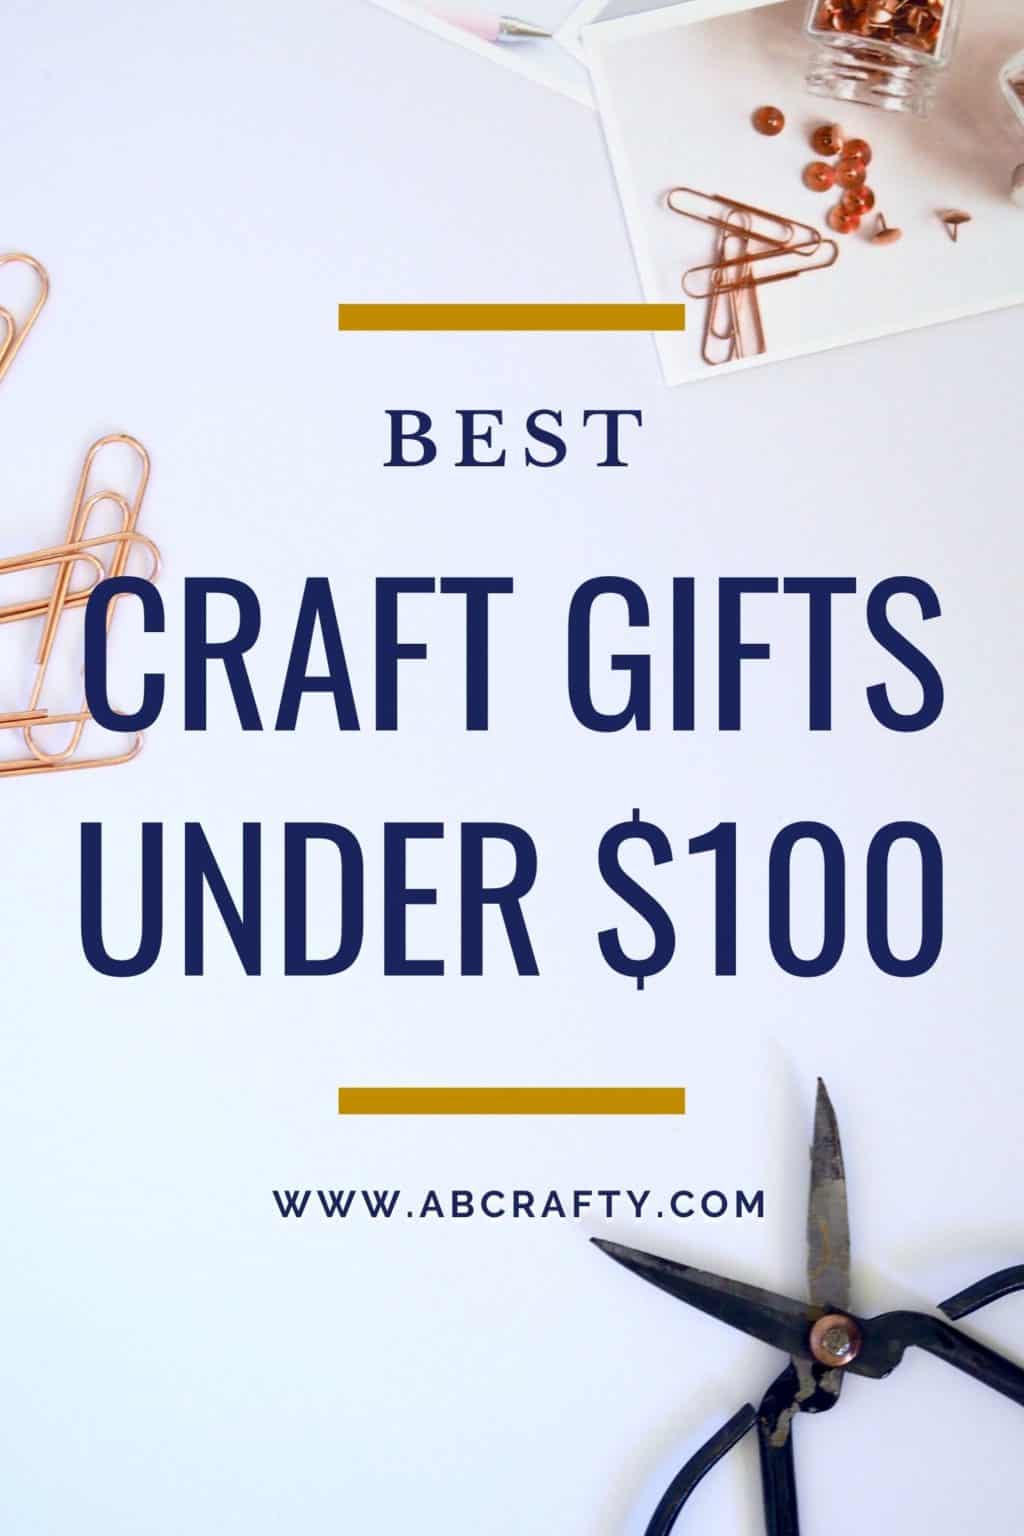 craft supplies including scissors and paper clips with the title "best craft gifts under $100, by abcrafty.com"